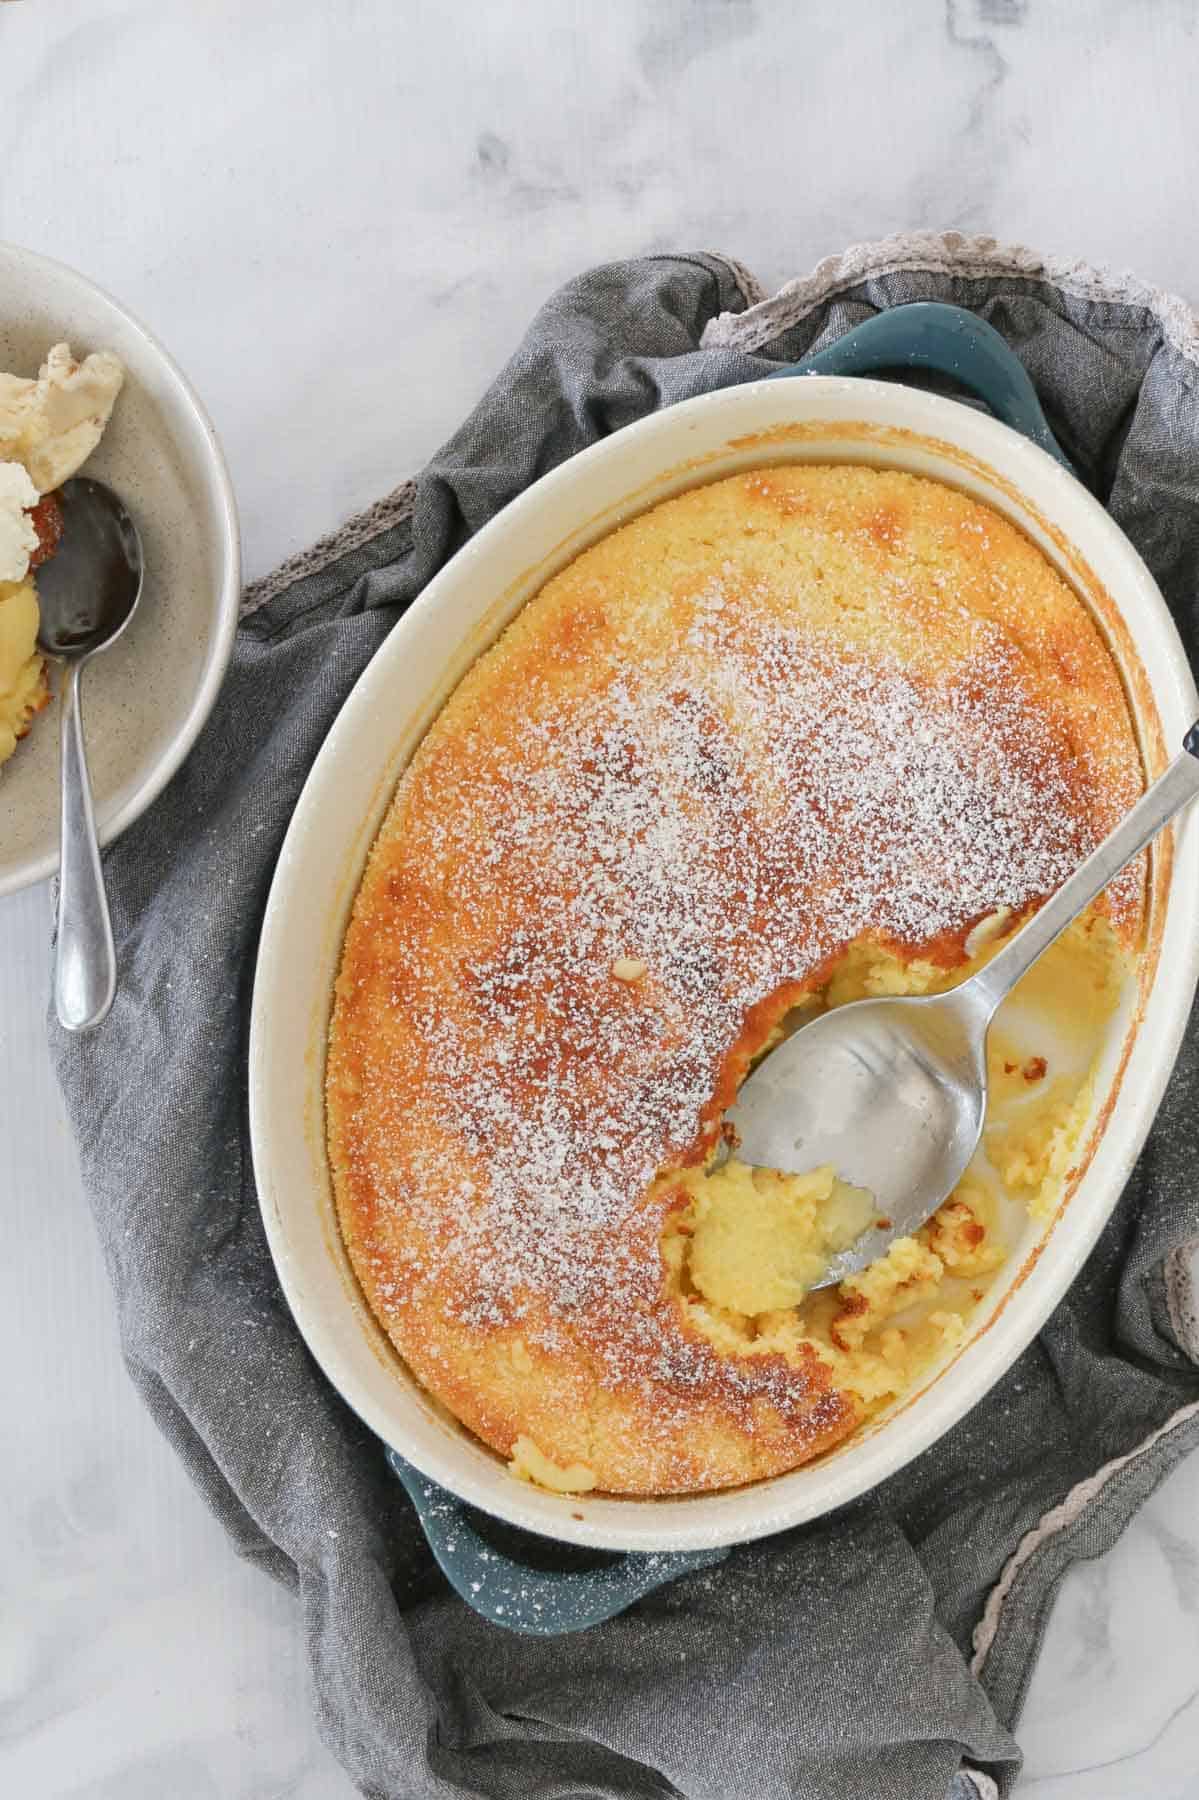 An overhead view of a white oval ovenproof baking dish filled a golden baked pudding dusted with icing sugar.